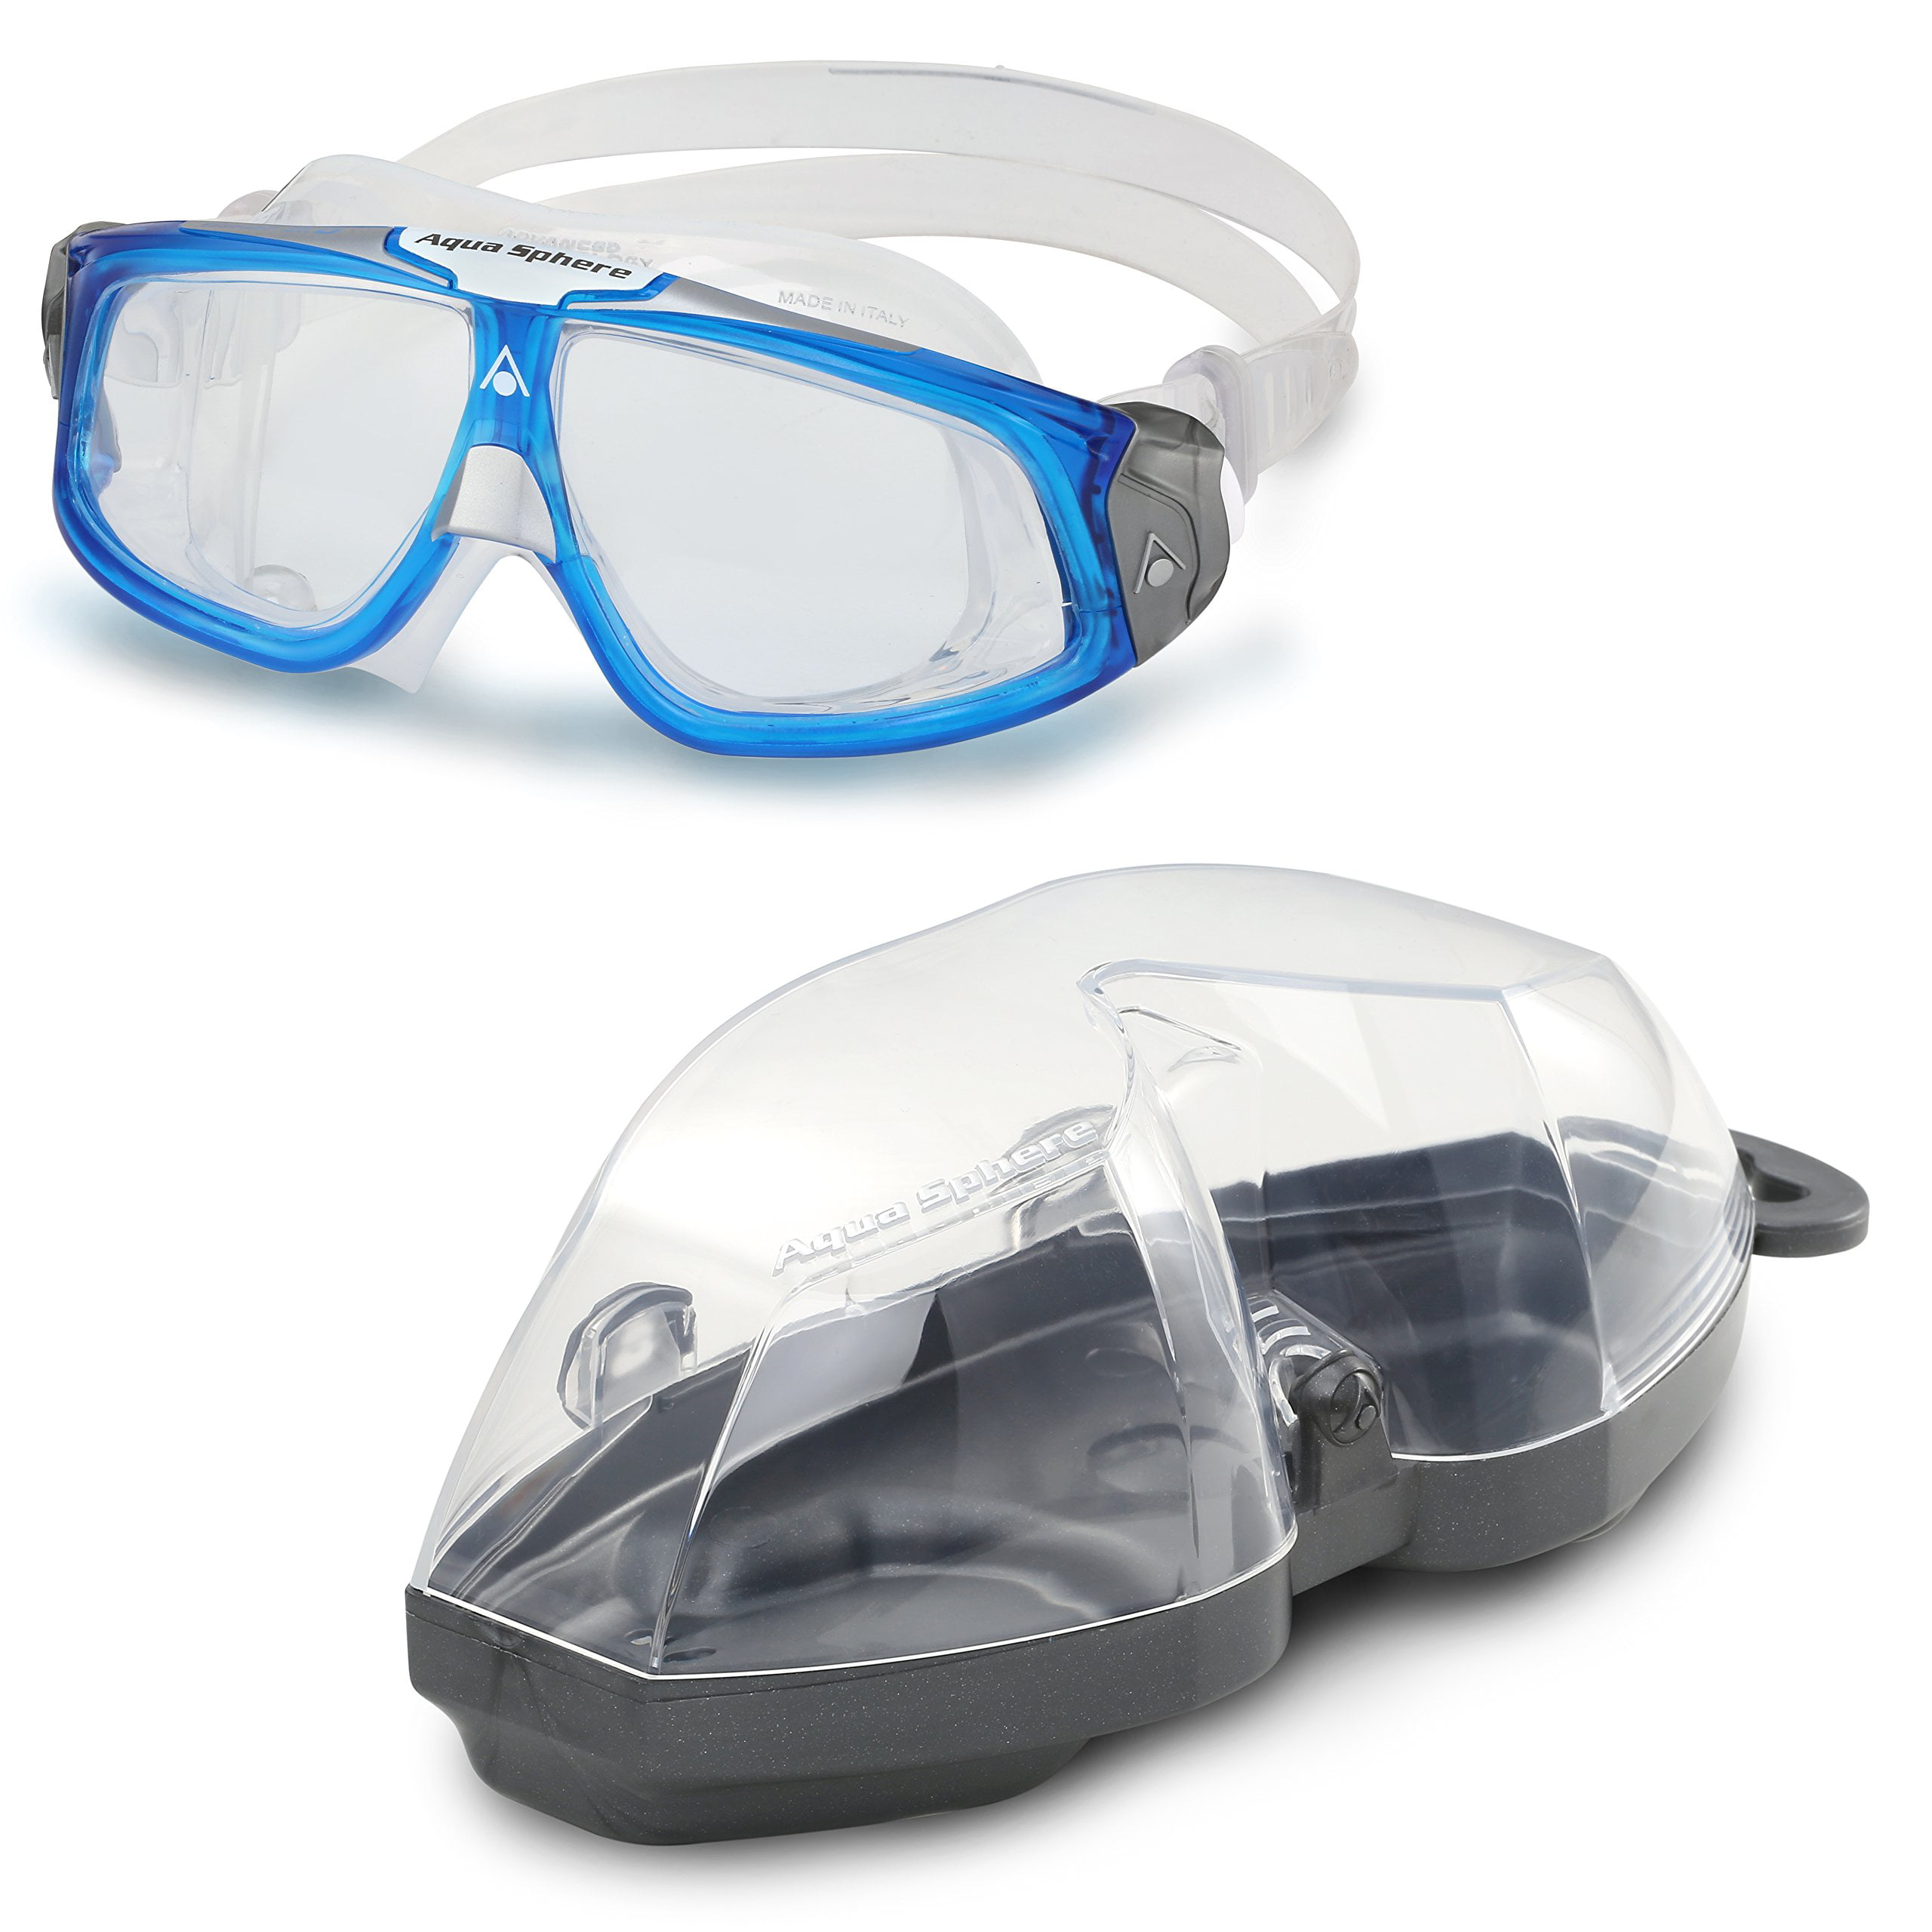 Aqua Lung America Seal Mask with Clear Lens Blue 